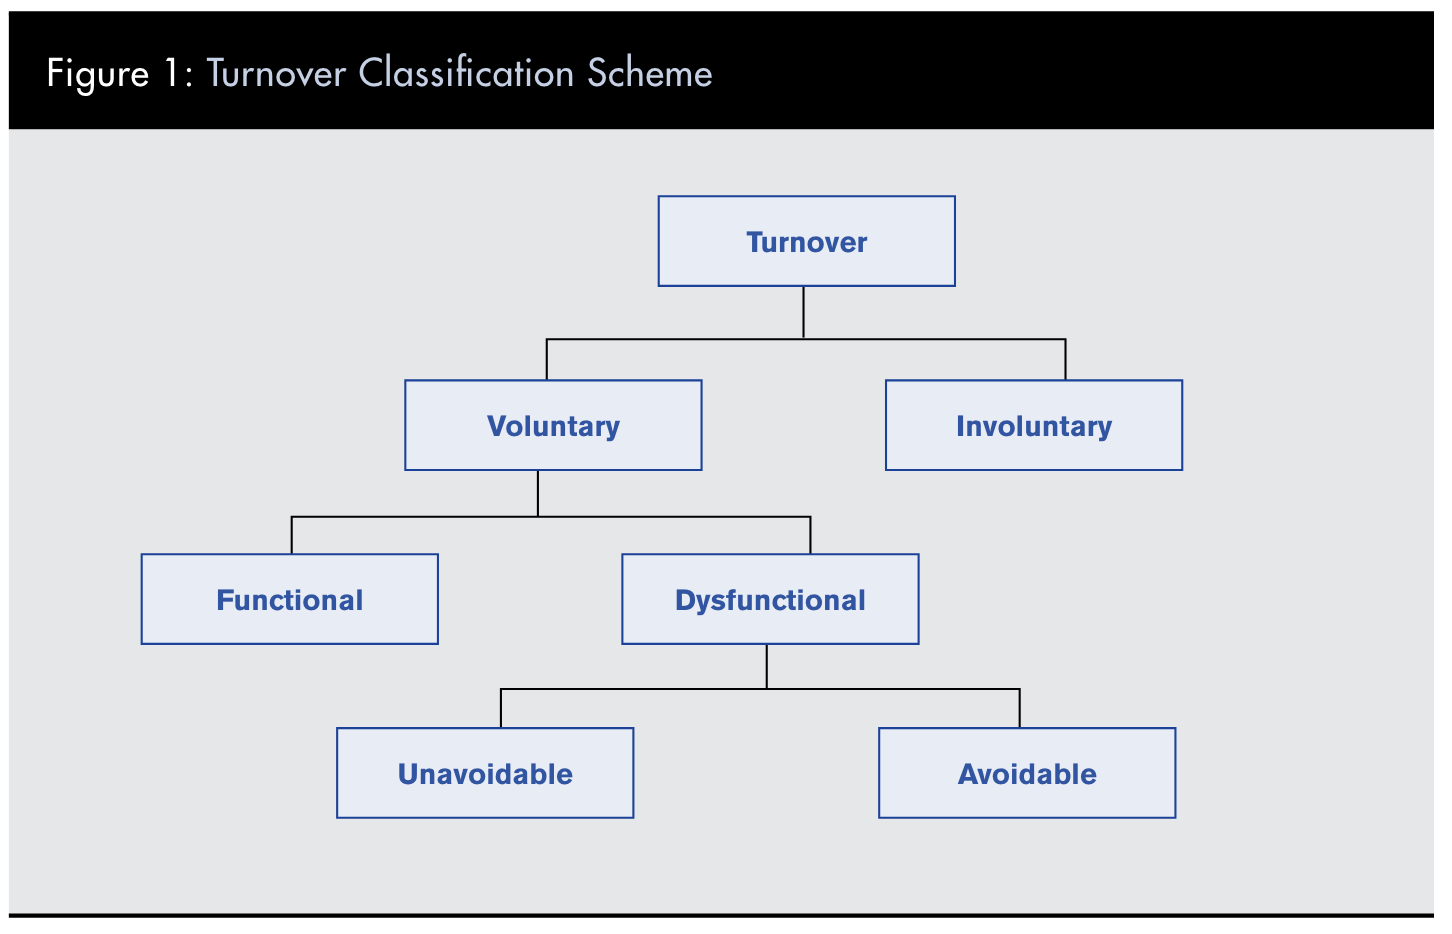 An organizational chart starting with turnover, with that category divided into voluntary and involuntary. The voluntary category is further divided into functional and dysfunctional. Lastly, the dysfunctional category is divided into unavoidable and avoidable.